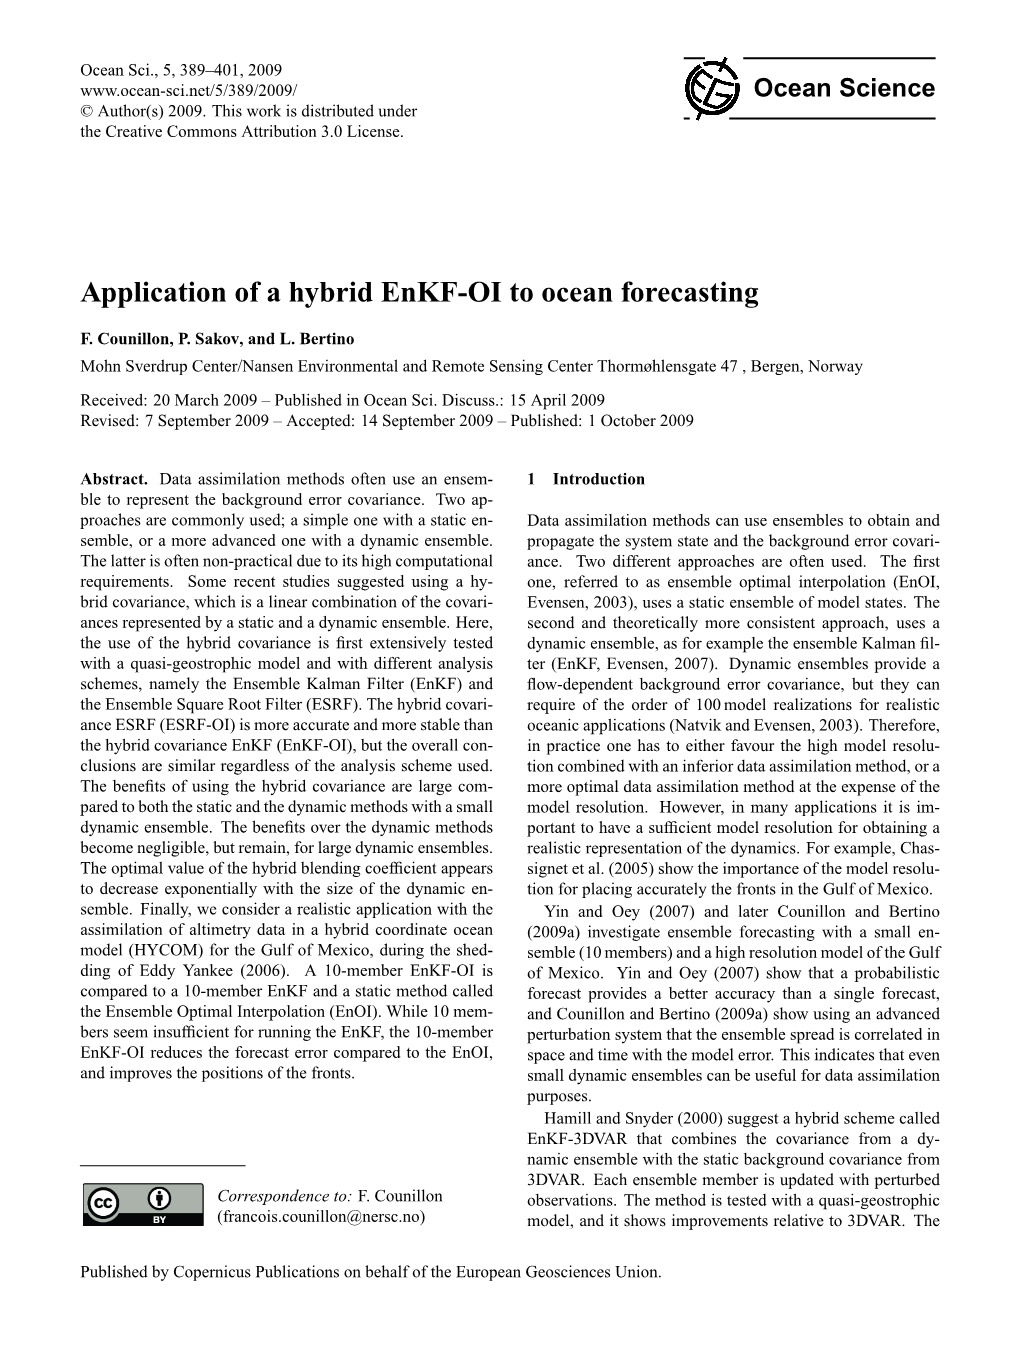 Application of a Hybrid Enkf-OI to Ocean Forecasting